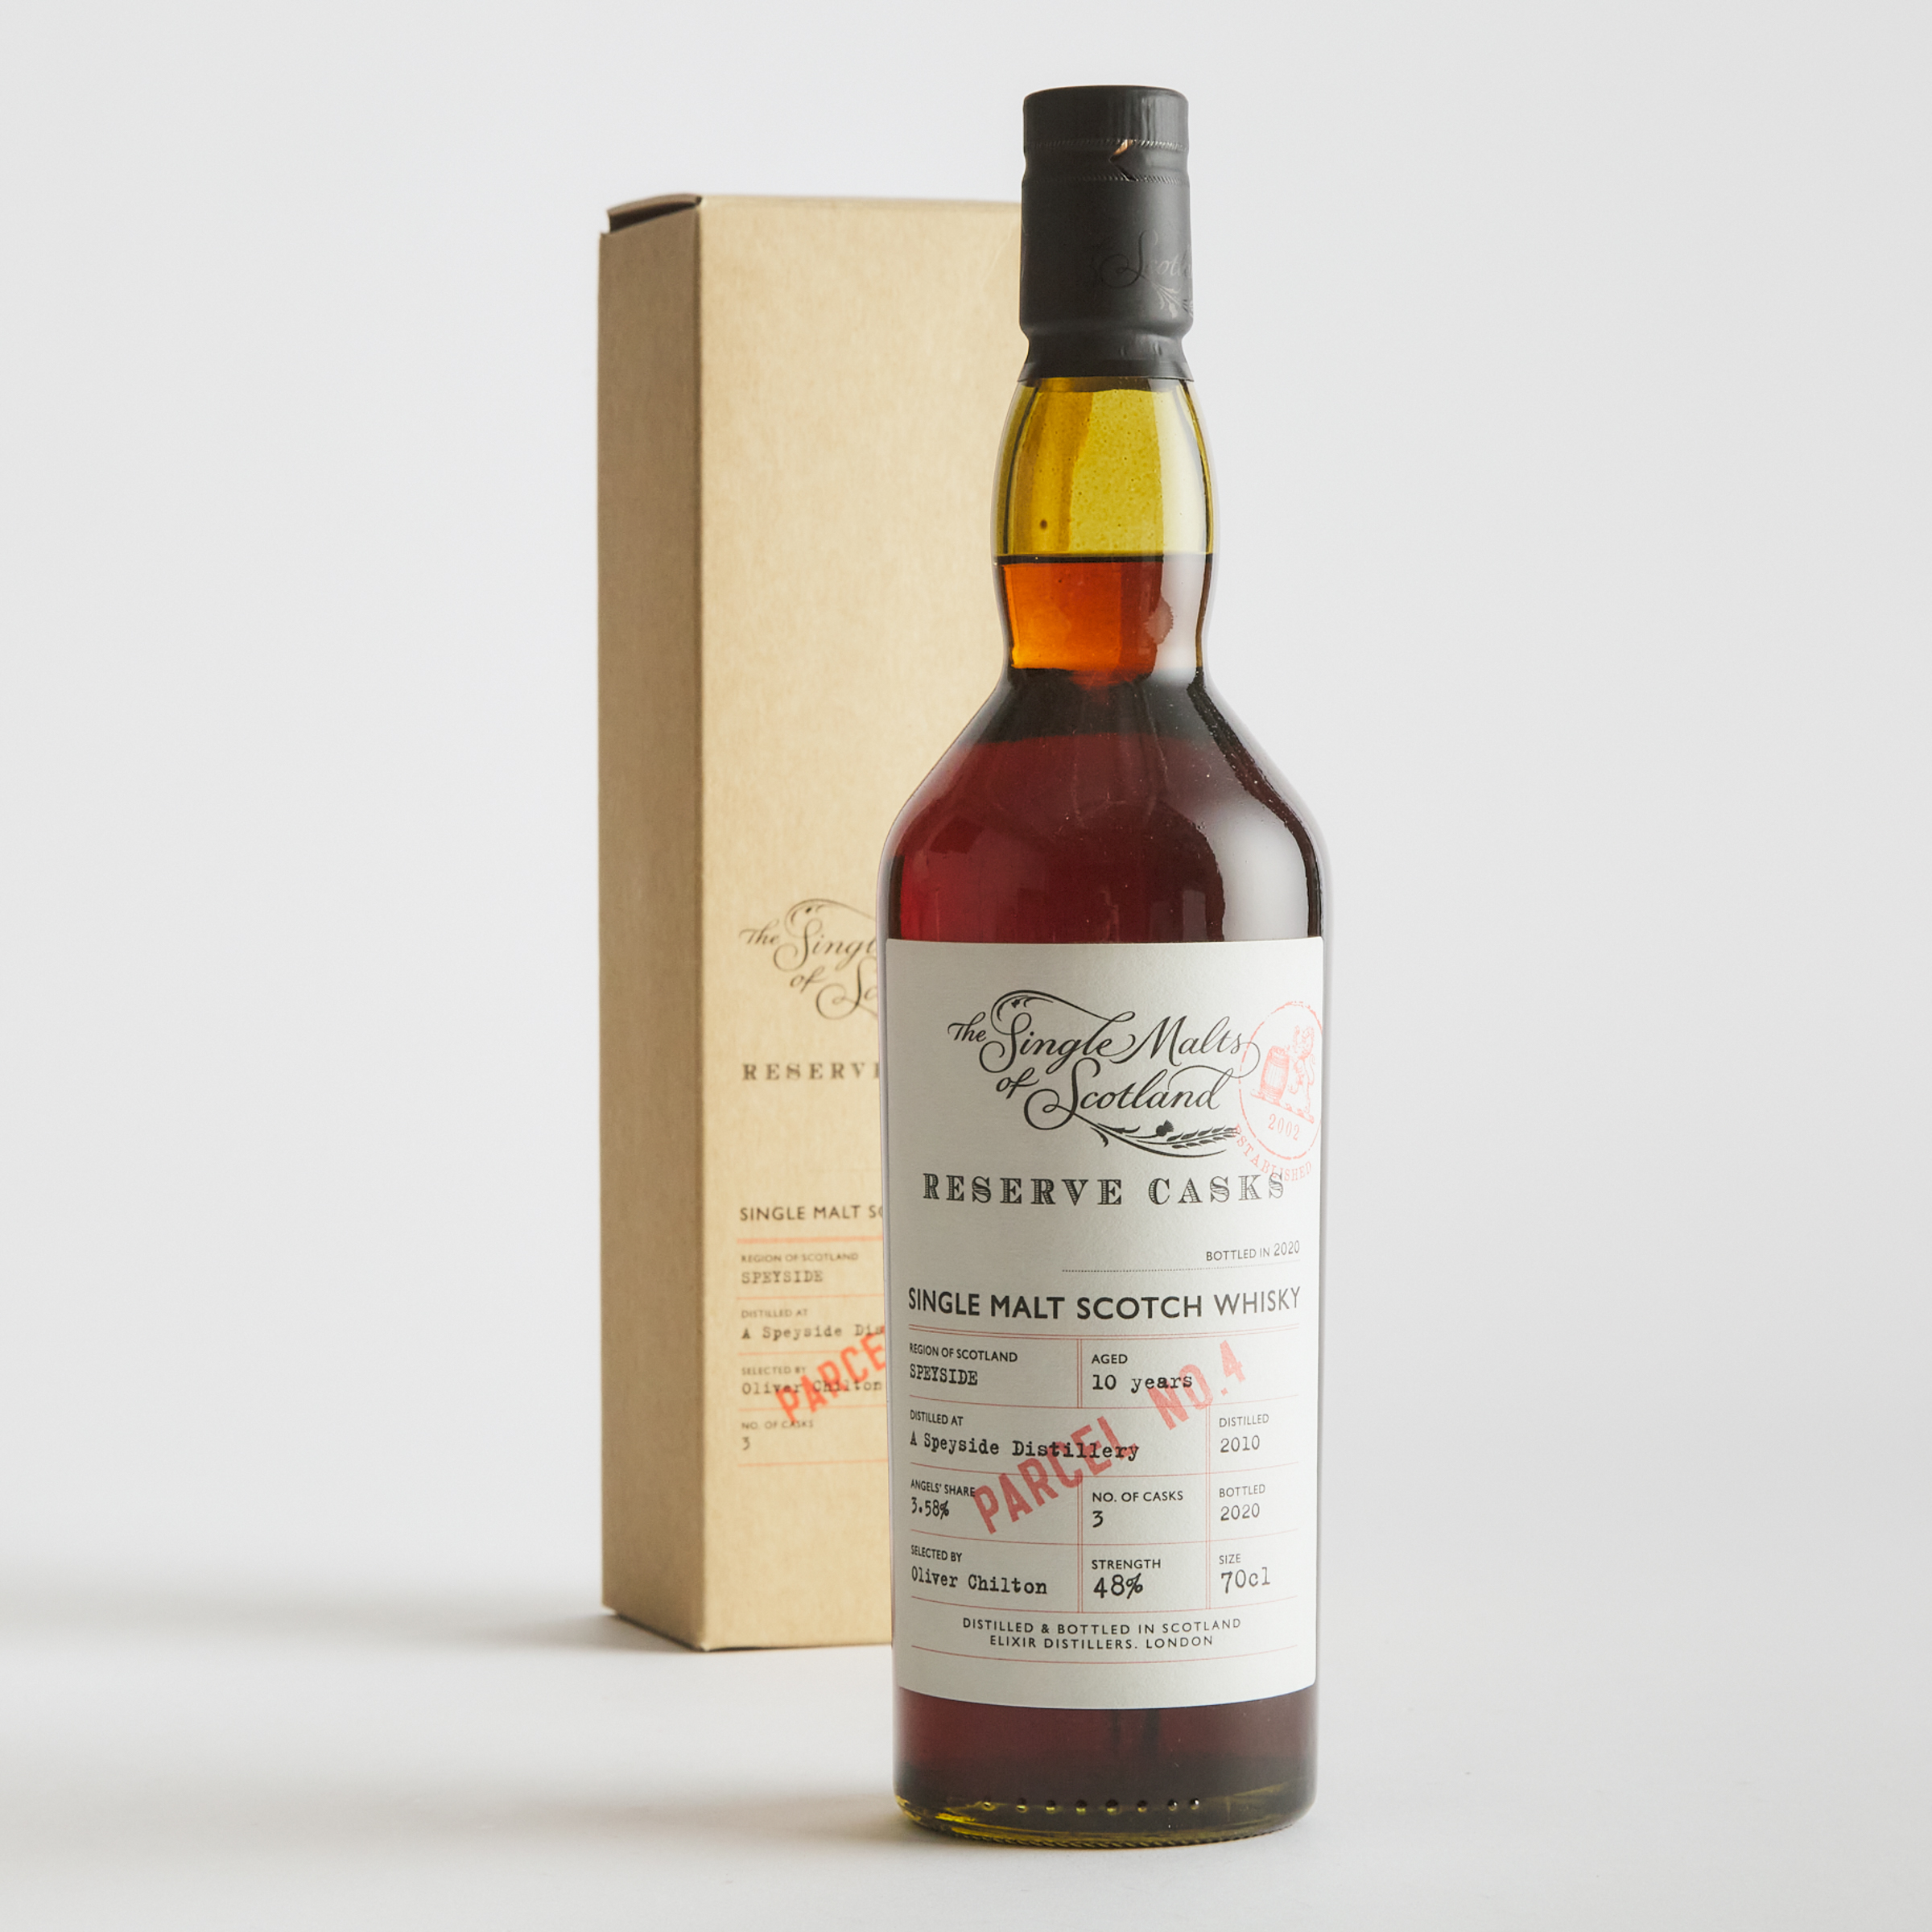 THE MACALLAN SINGLE MALT SCOTCH WHISKY 10 YEARS (ONE 70 CL)